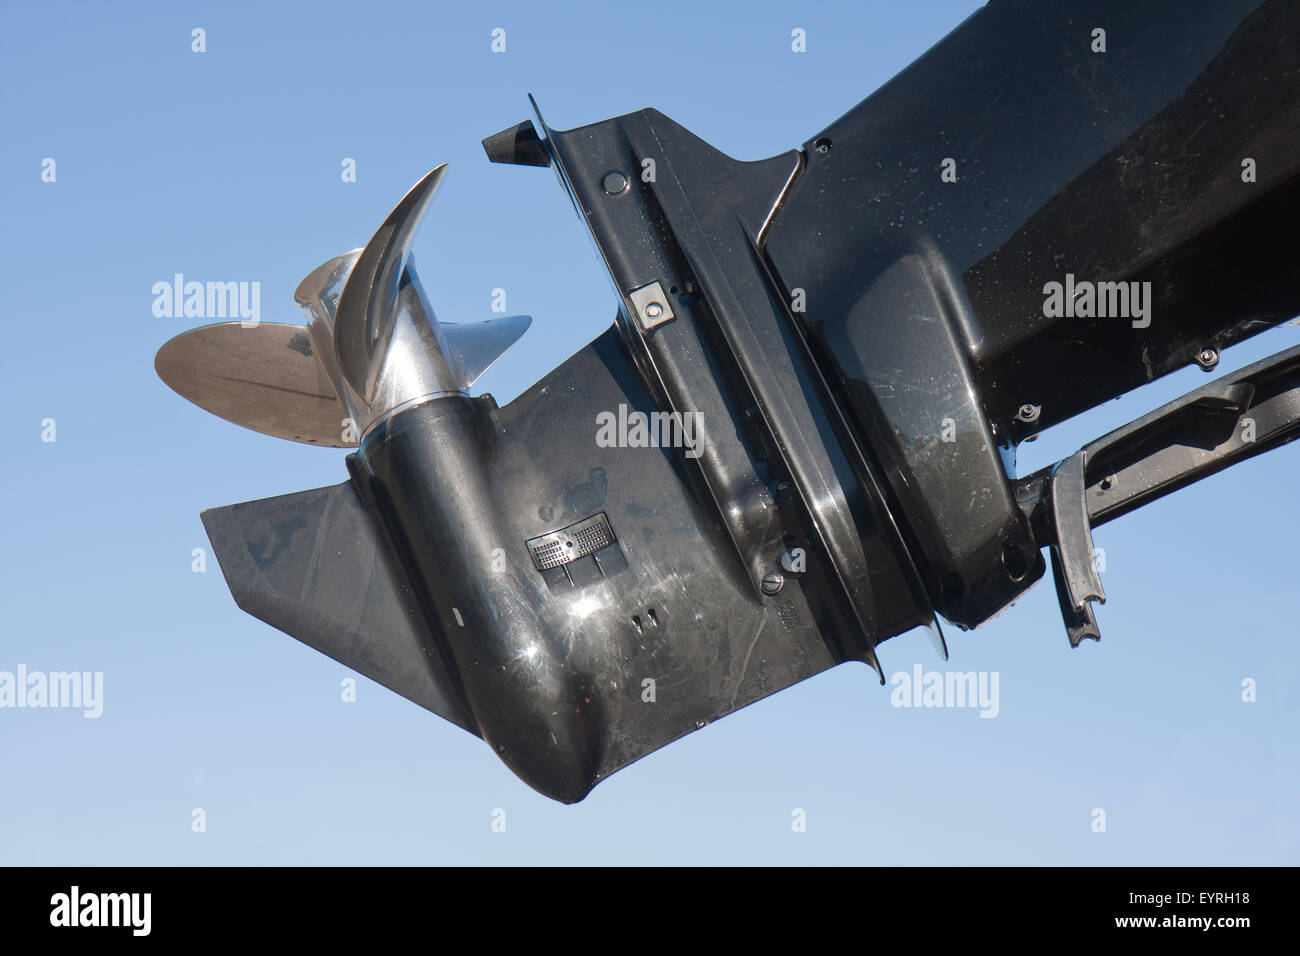 Screw of a motor boat against a blue sky Stock Photo